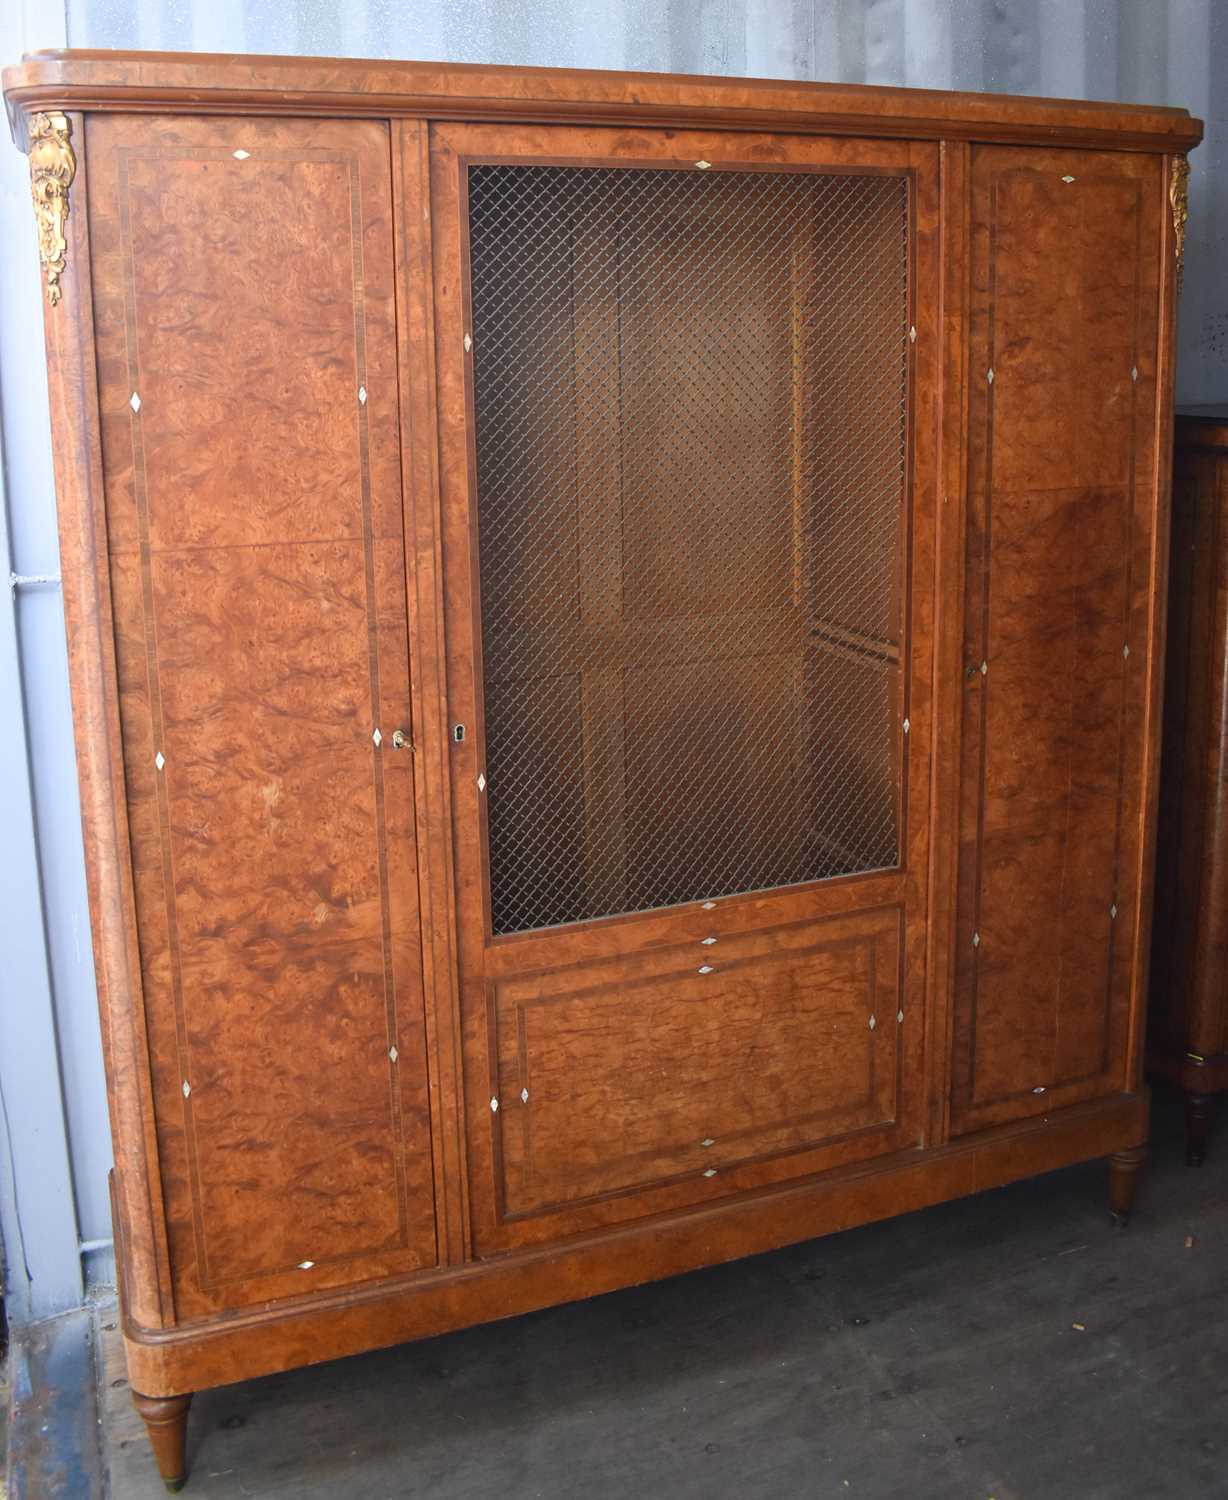 An early 20th century French burrwood cabinet, the central door having a grille panel opening to